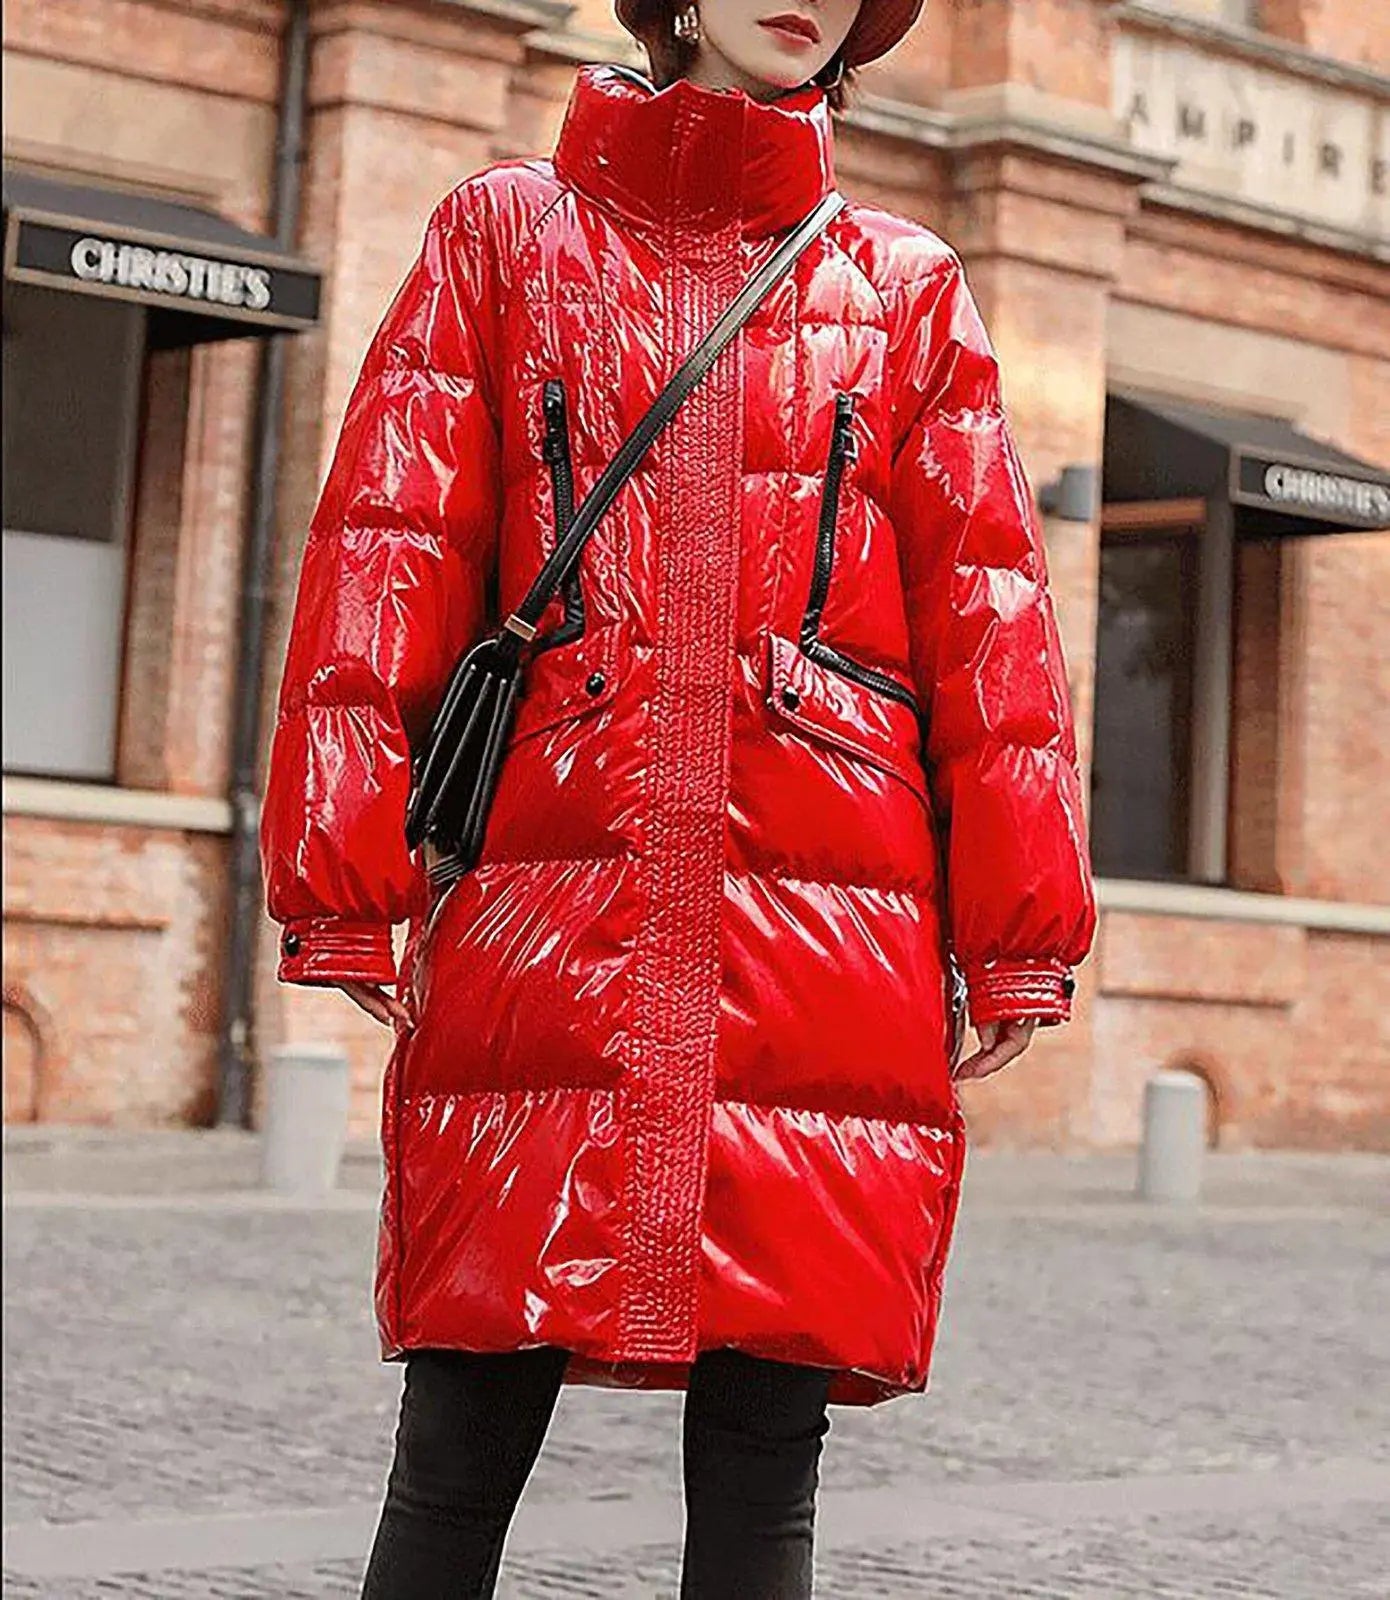 Women's Oversize Shiny Down Coat,Plus Size Down Jacket,Red Puffer